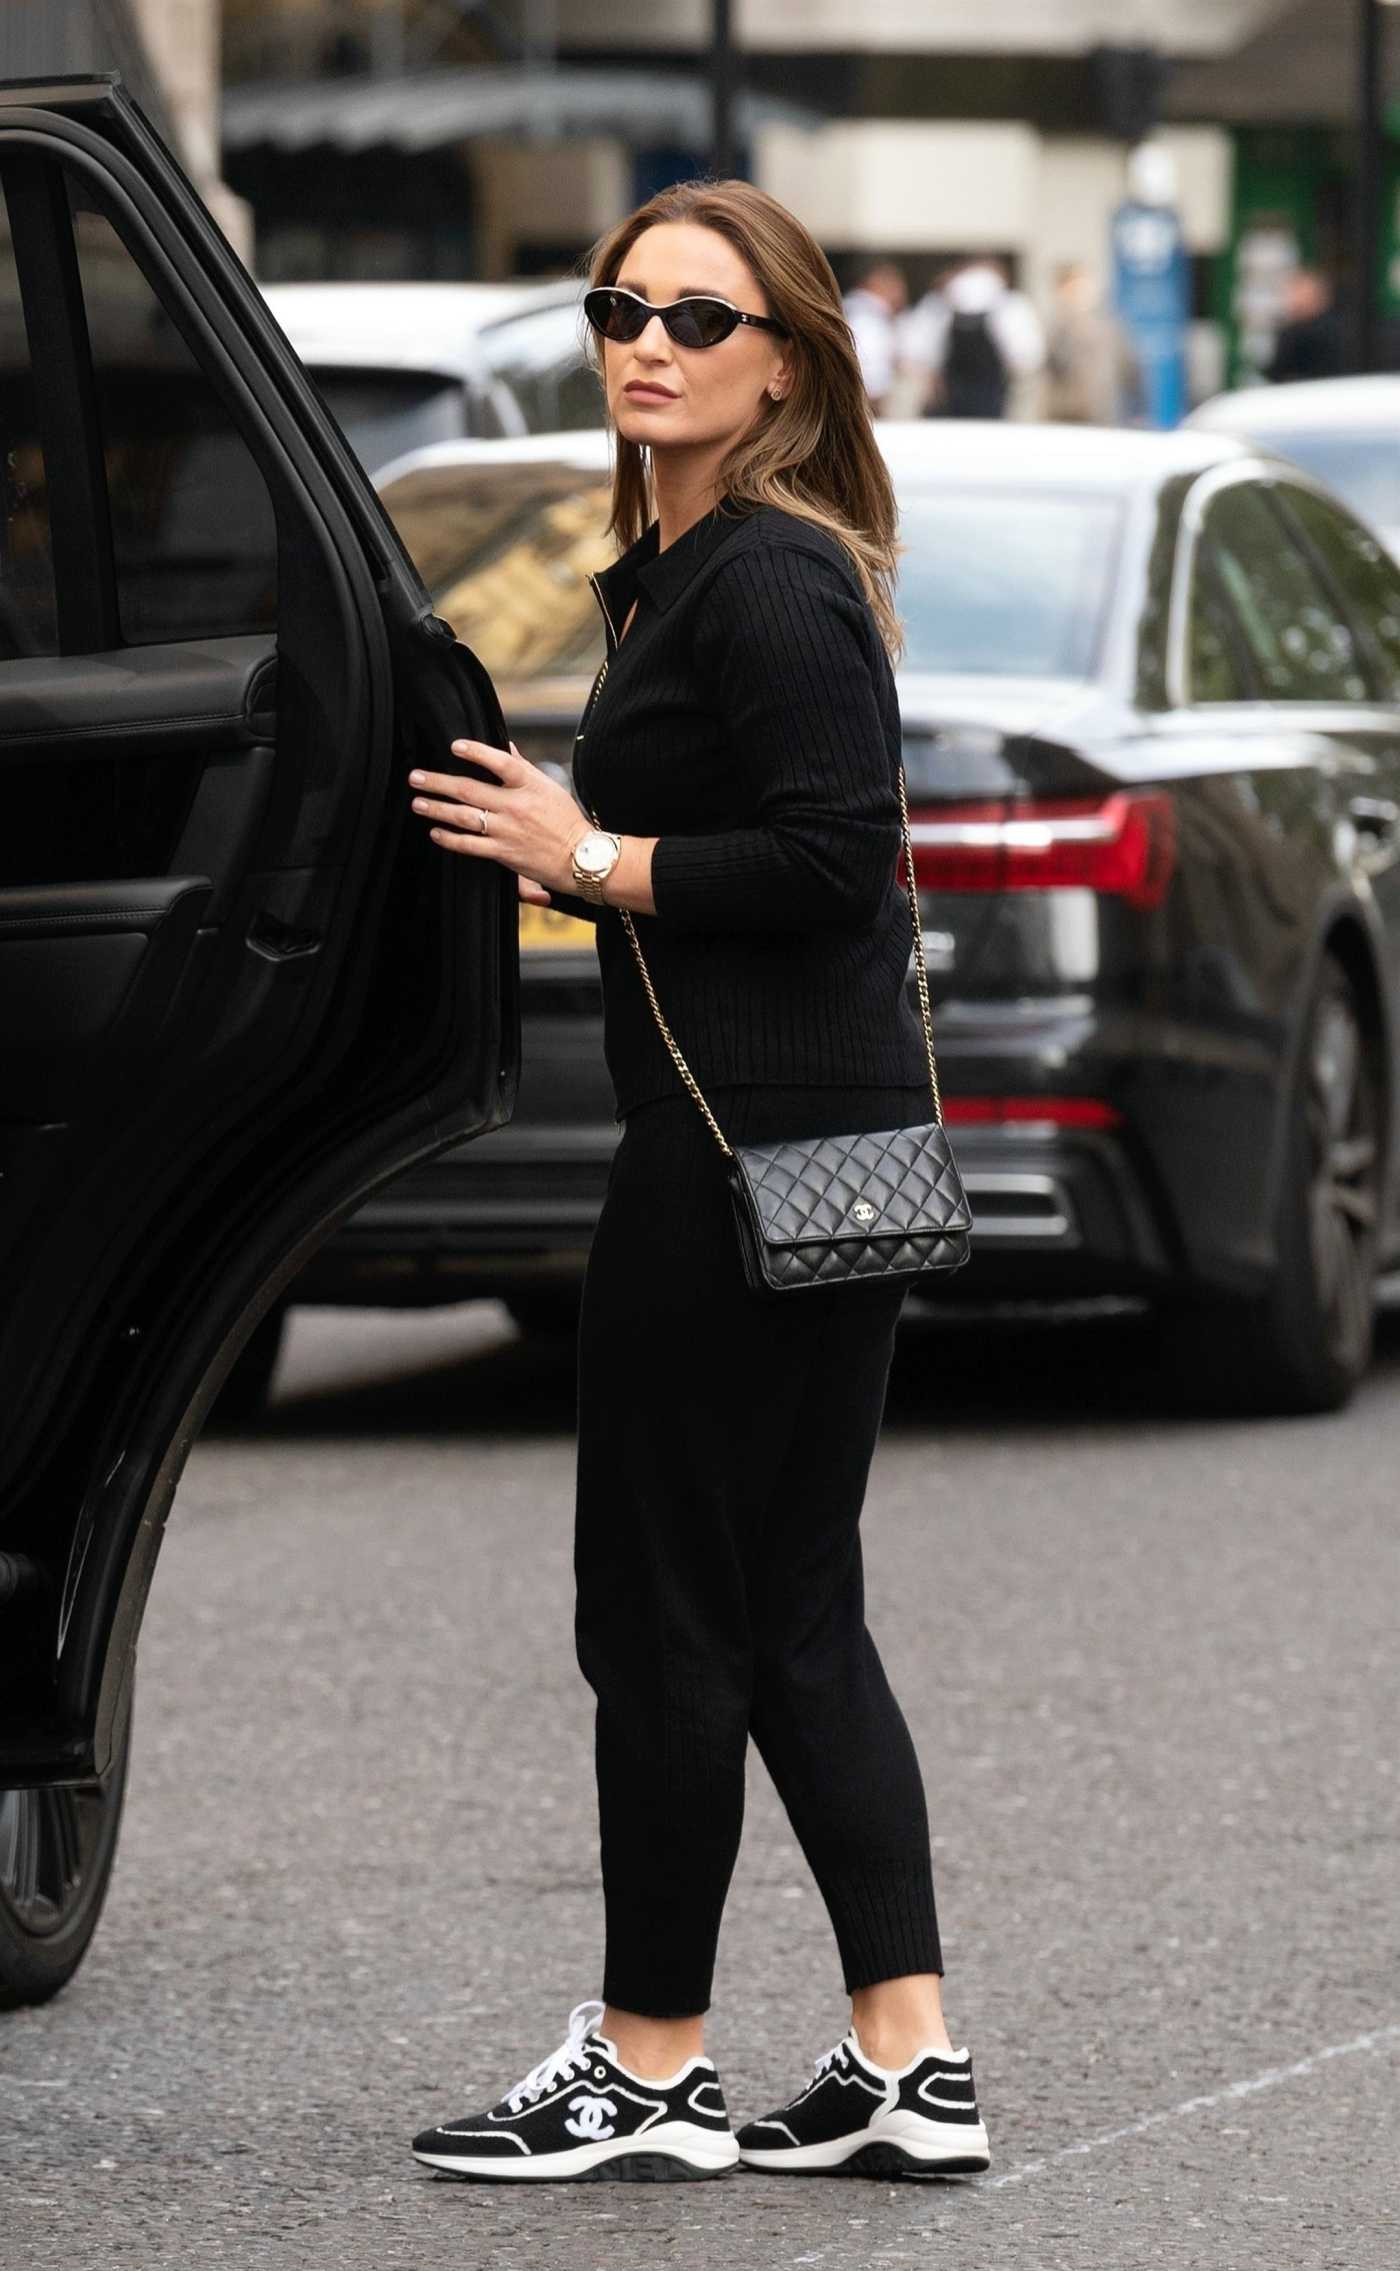 Sam Faiers in a Black Sneakers Arrives with Her Husband Paul Knightley at The Corinthia Hotel in London 10/29/2020